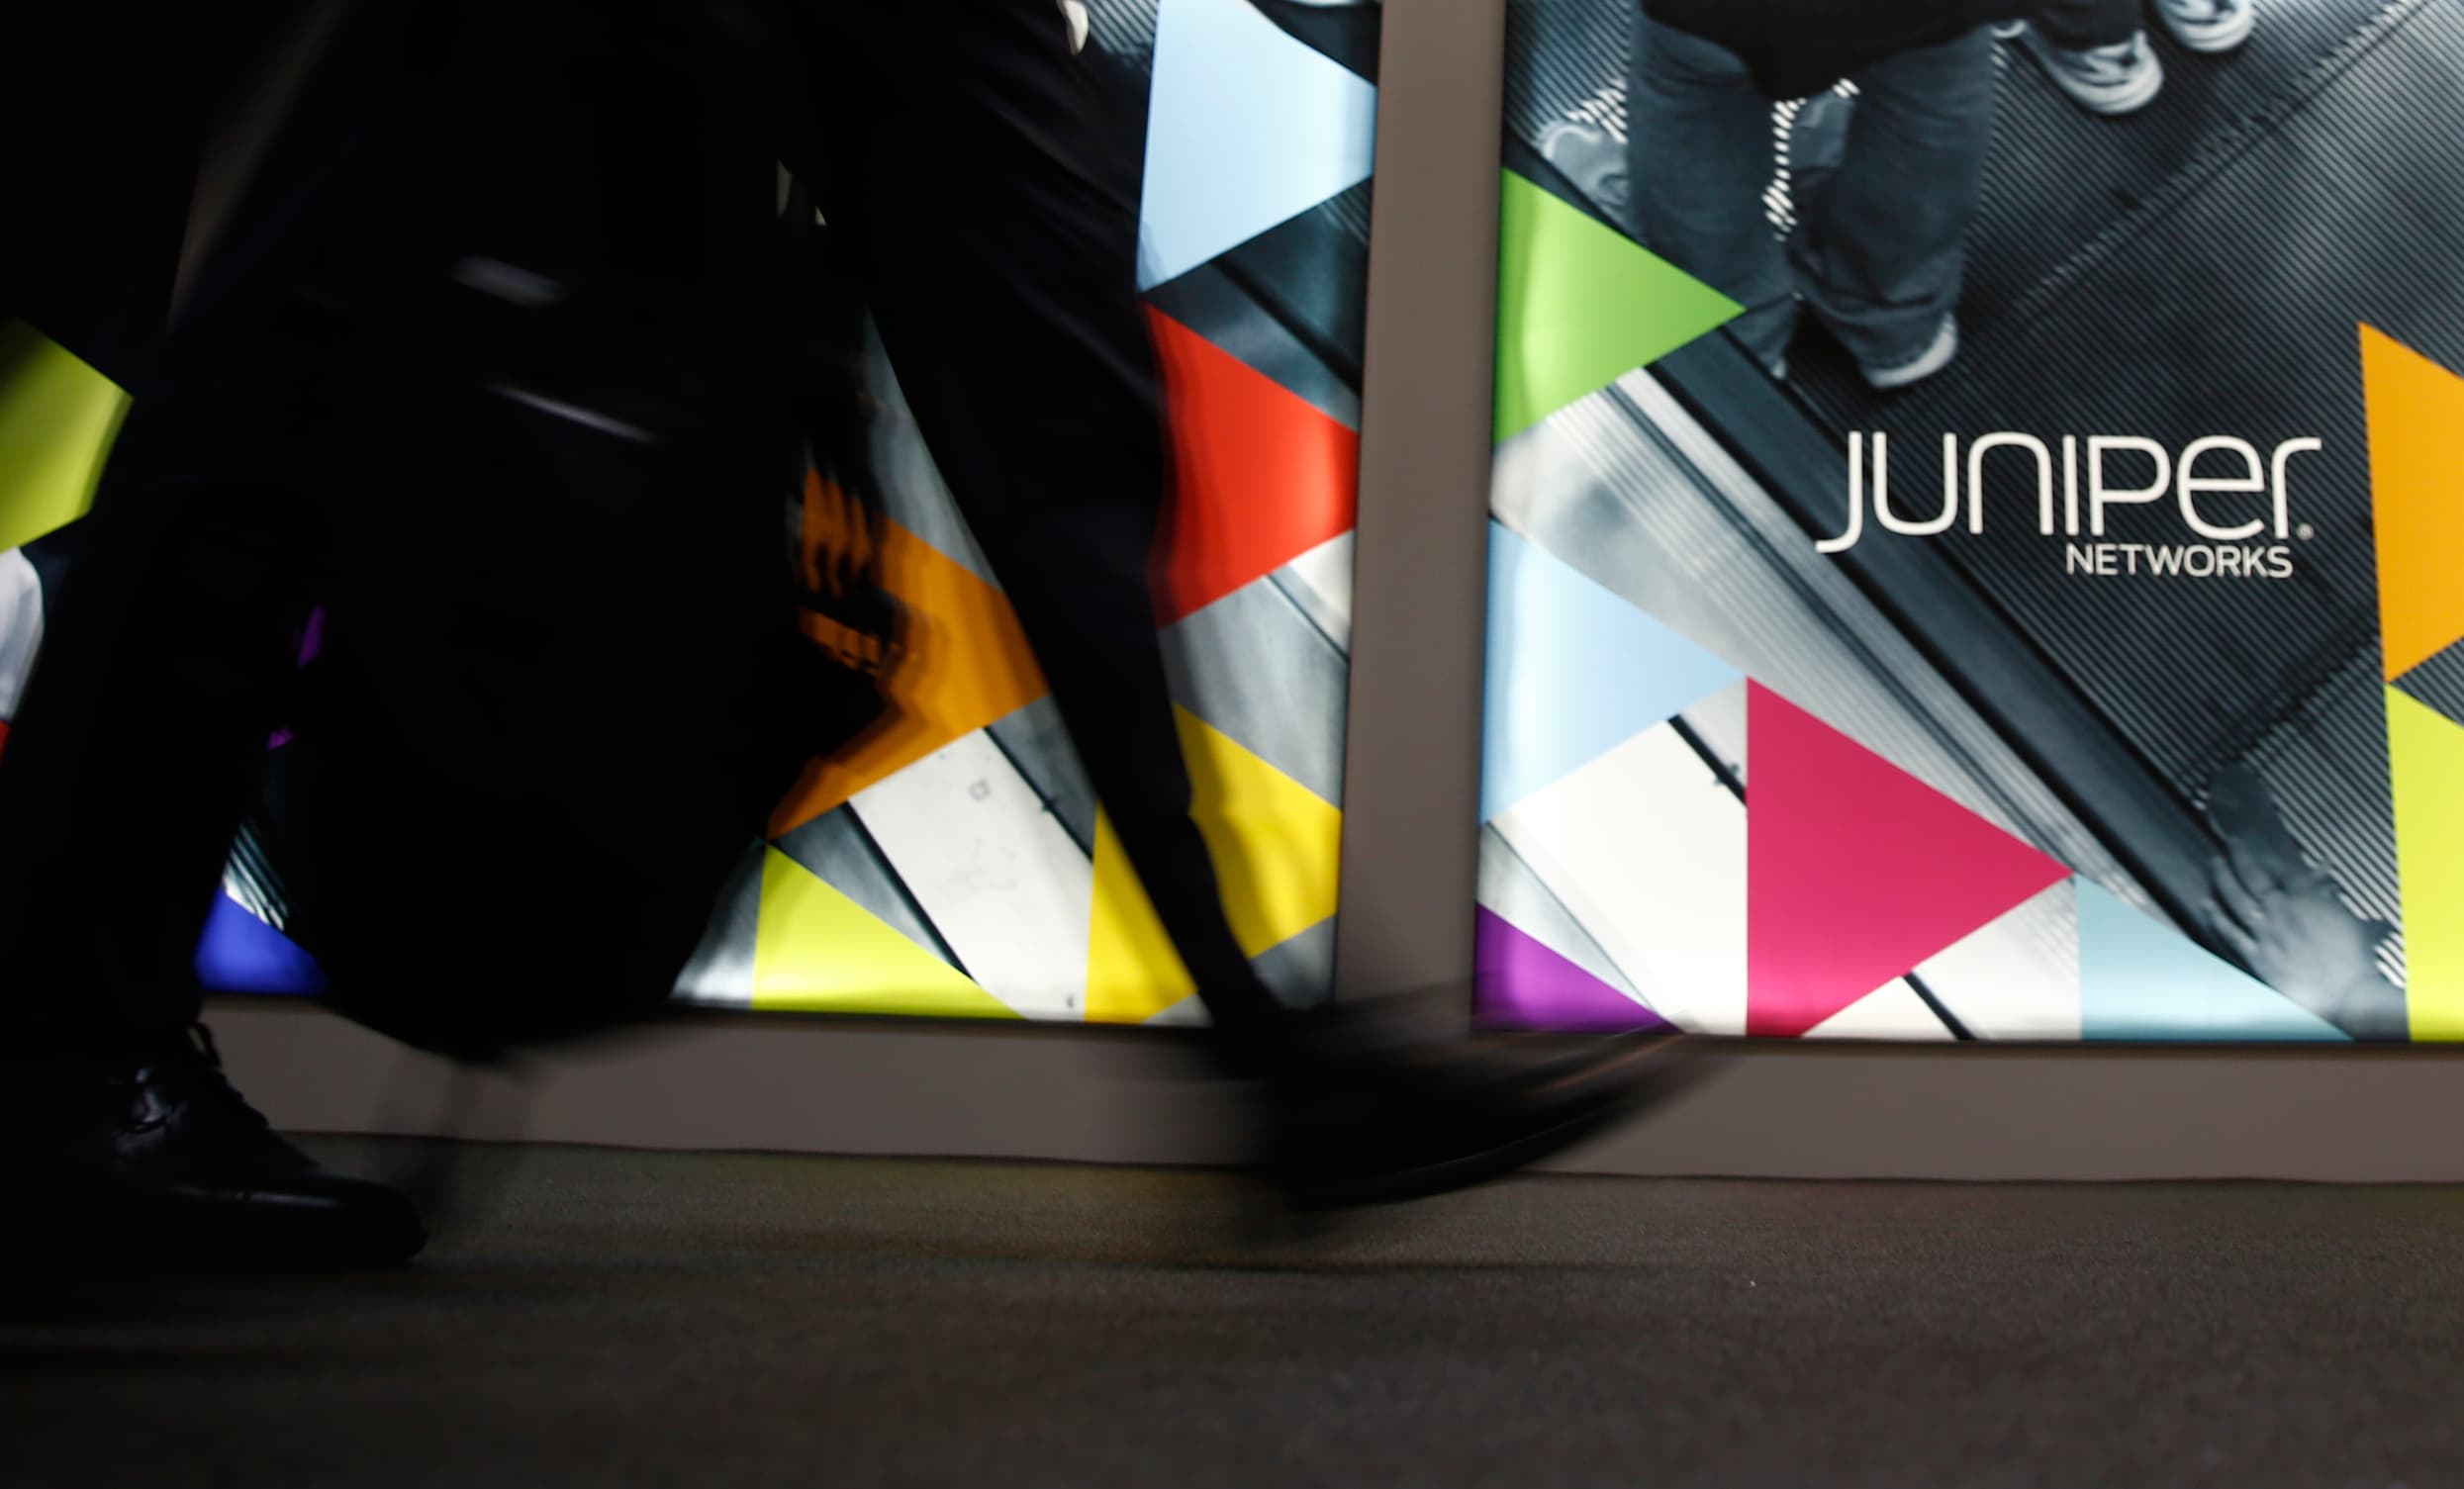 Goldman Sachs says buy Juniper Networks, sees nearly 25% upside for the stock